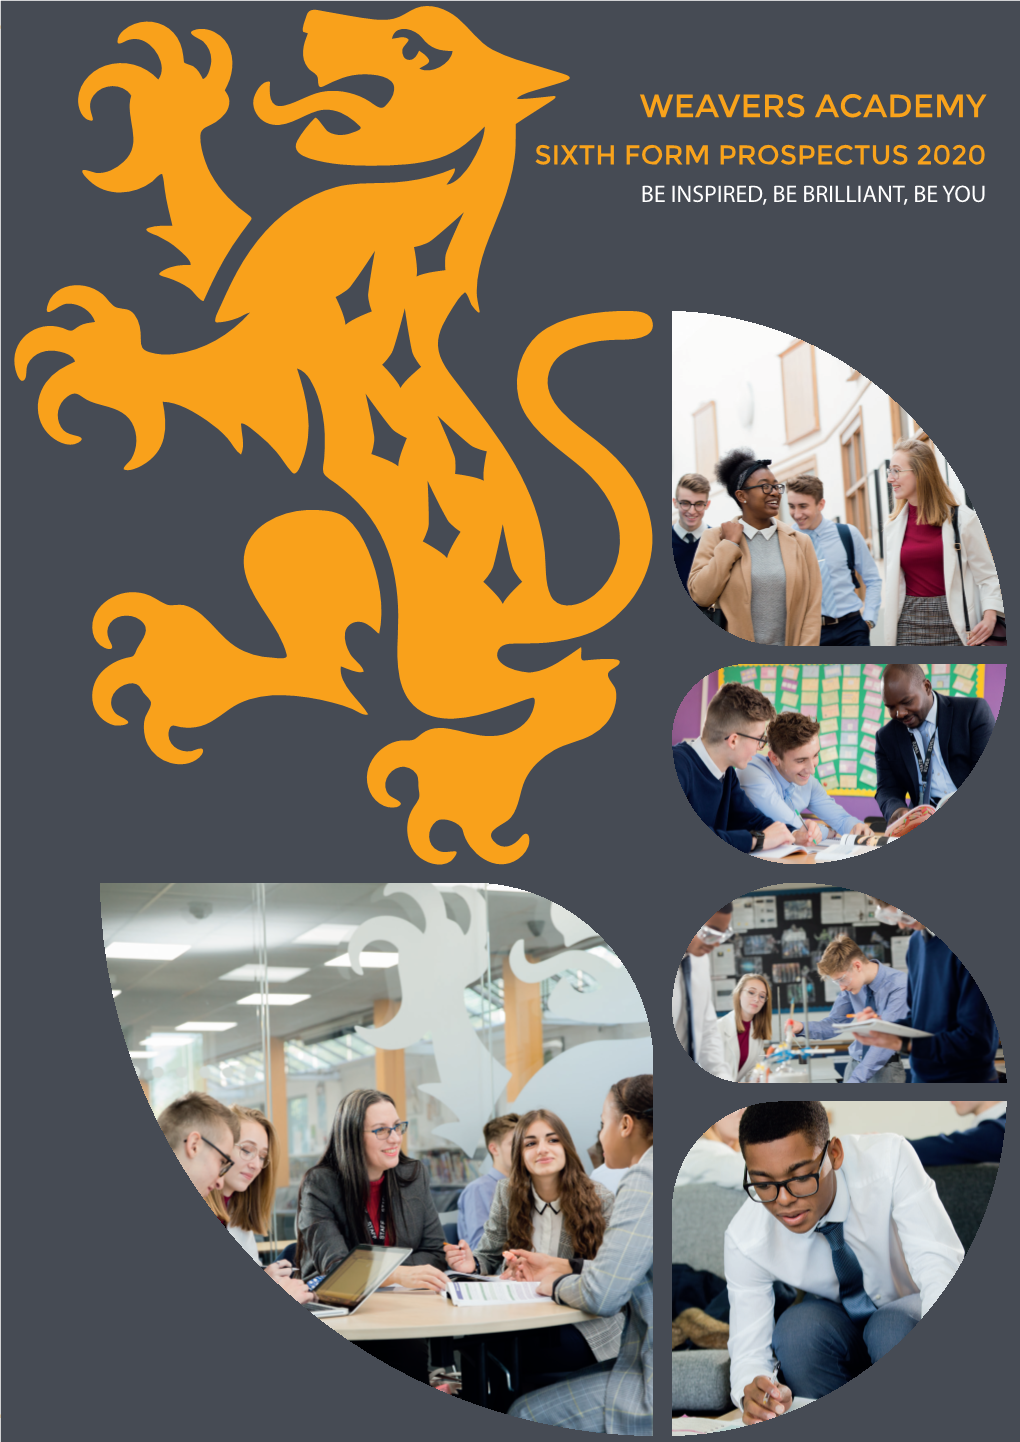 Weavers Academy Sixth Form Prospectus 2020 Be Inspired, Be Brilliant, Be You